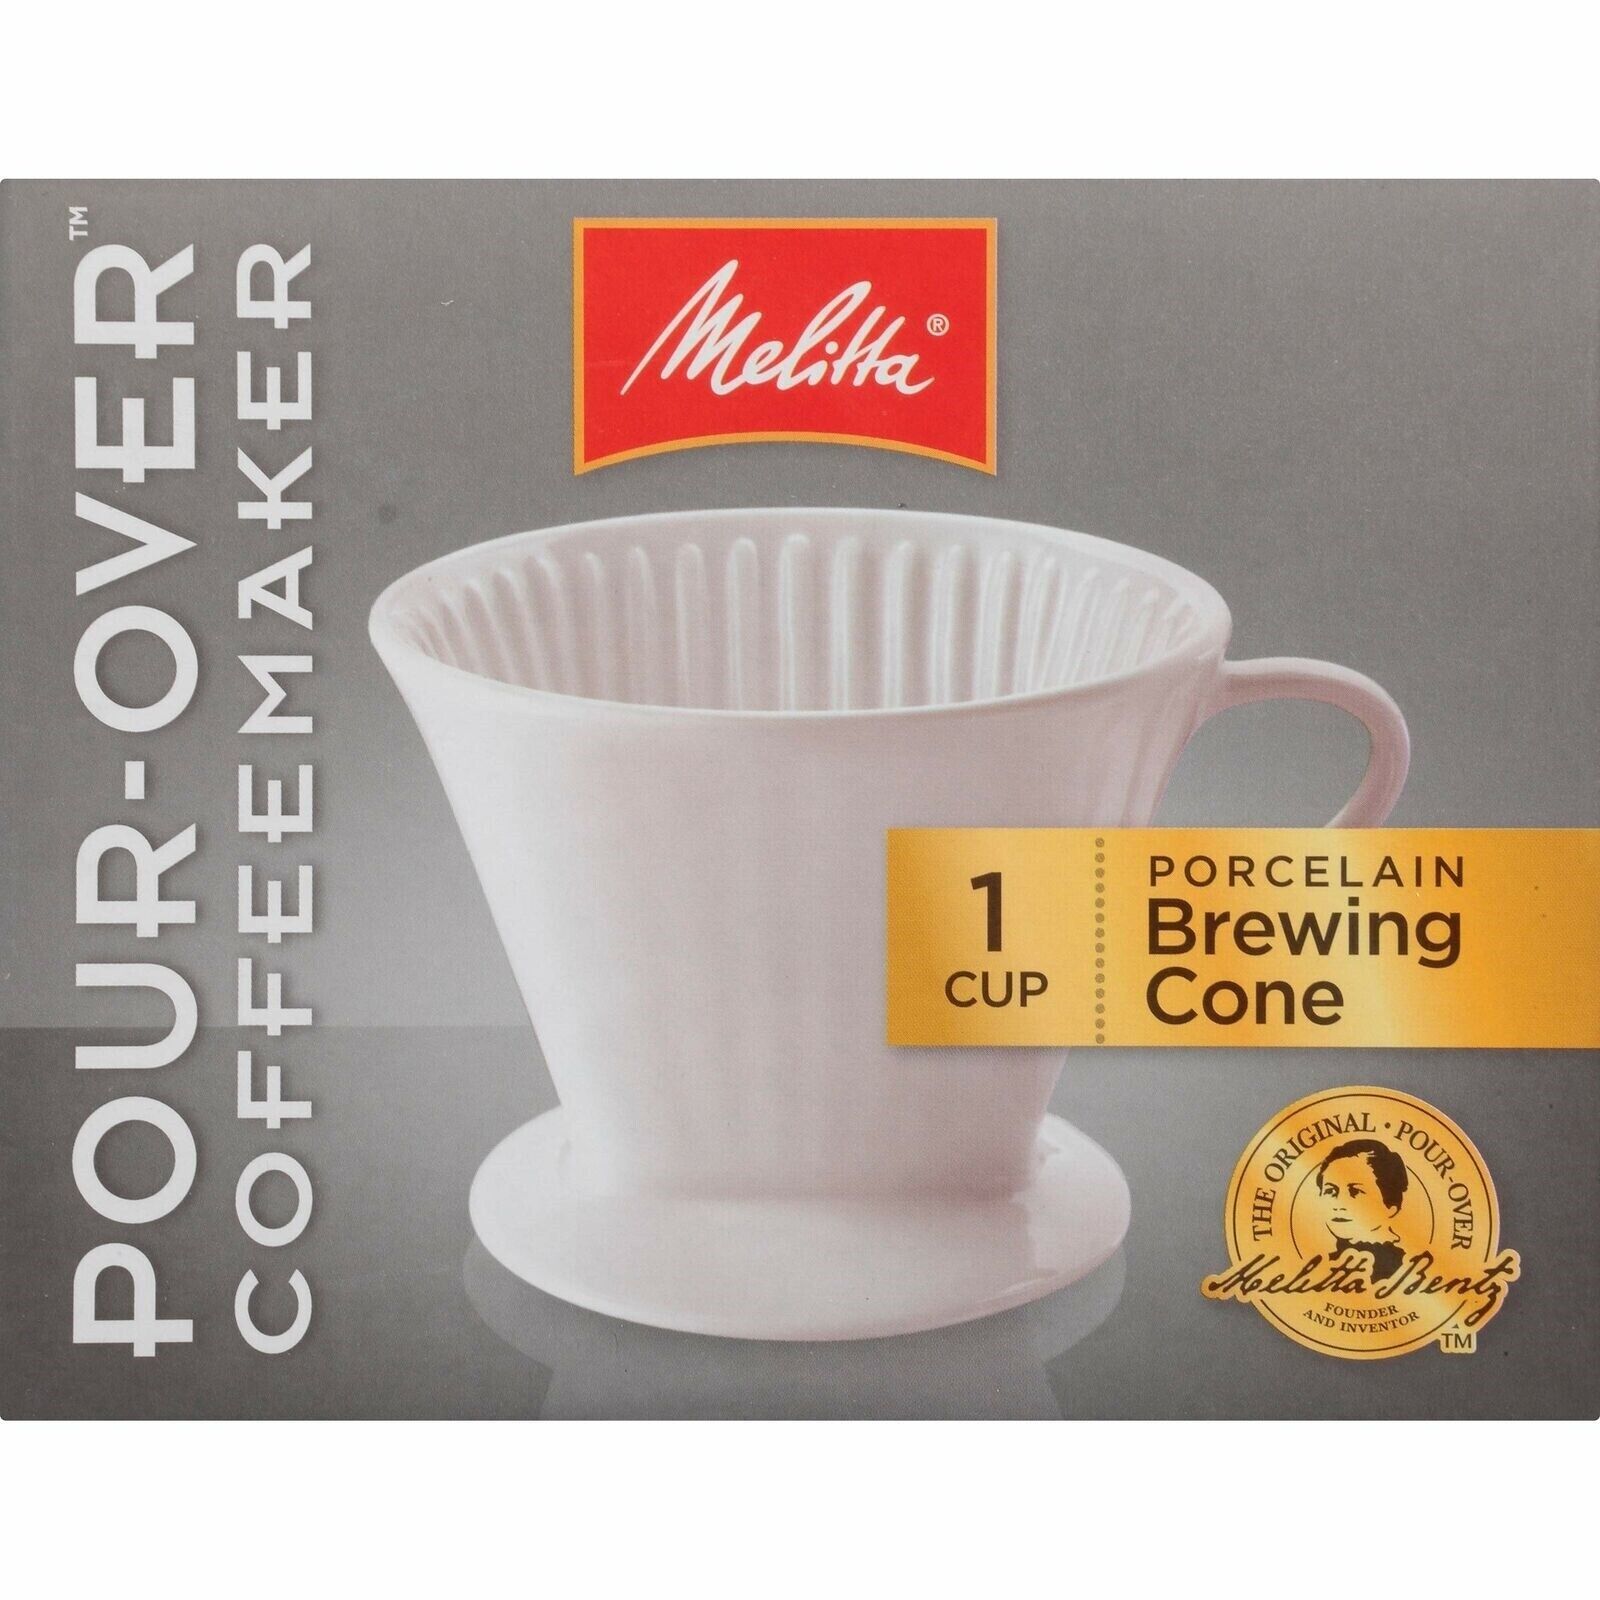 Melitta Coffee Makers Pour-Over Coffee Brewer Cone, Porcelain 1 cup - $23.15